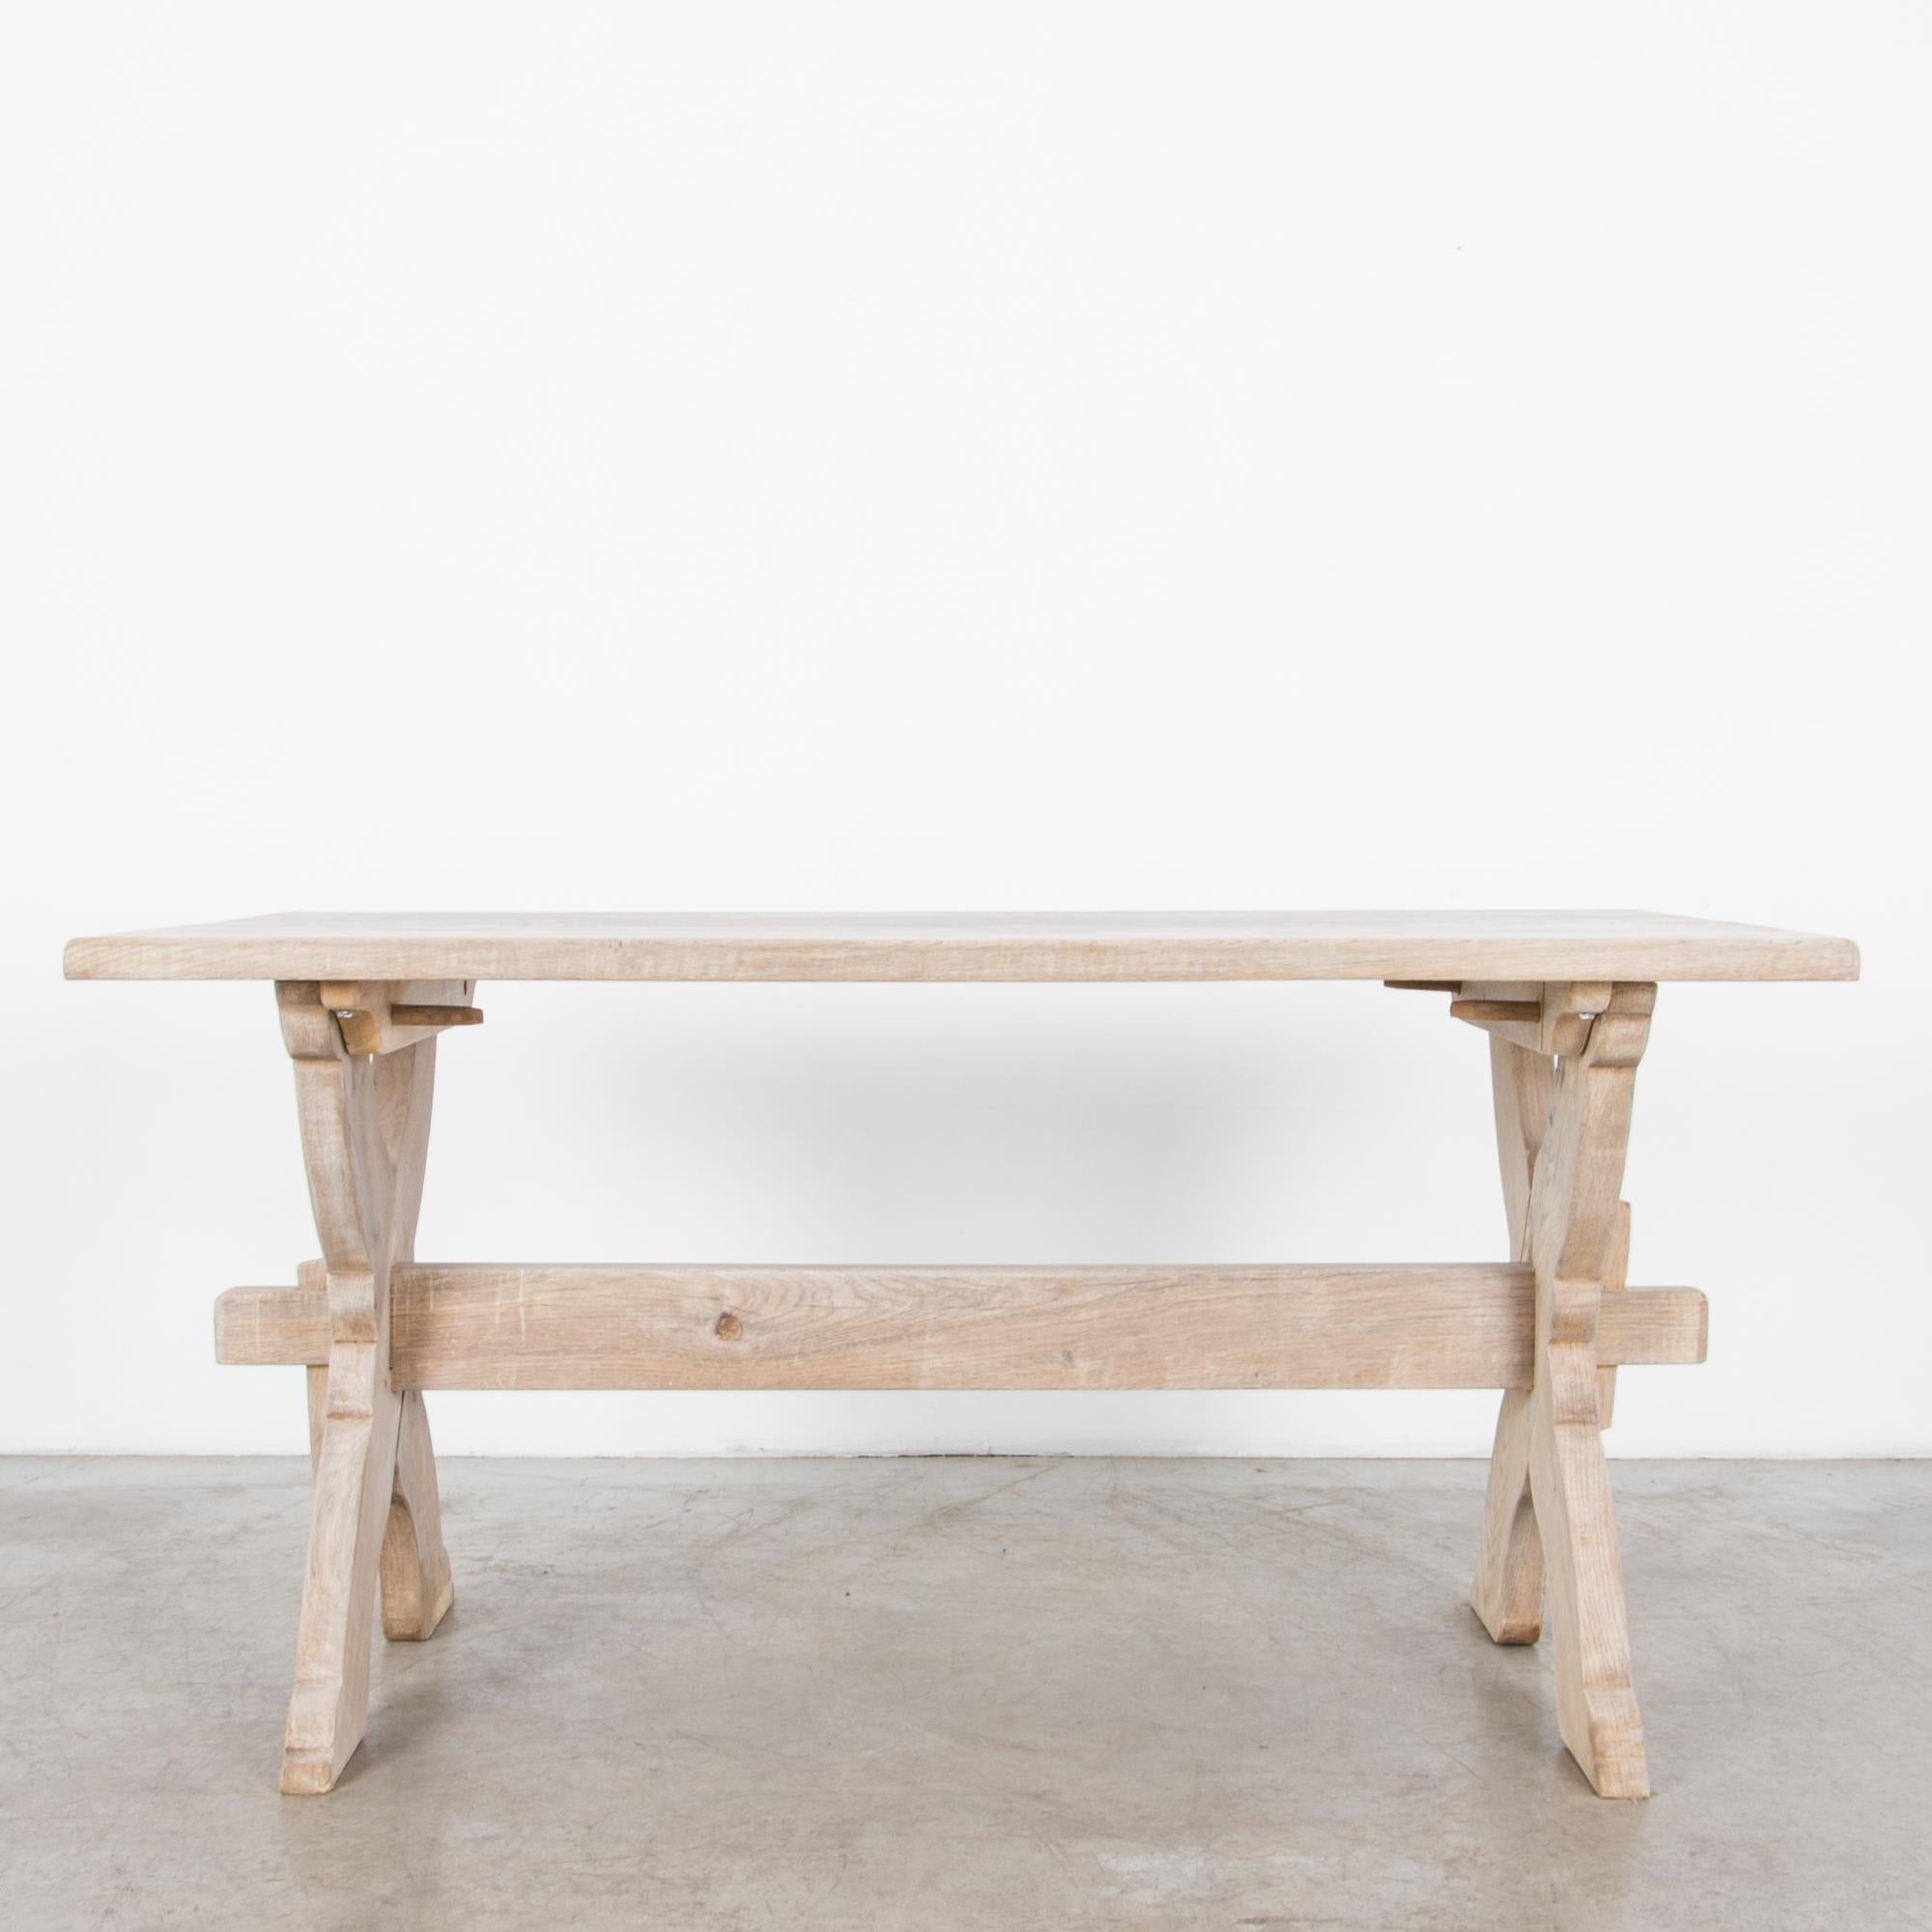 Rustic and simple Belgian style farmhouse table from the 1950s in bleached
oak, features distinct crossed legs and trestle brace. Simple wooden forms
recall the countryside ideal, following the lineage of European craftsmanship, with modernist